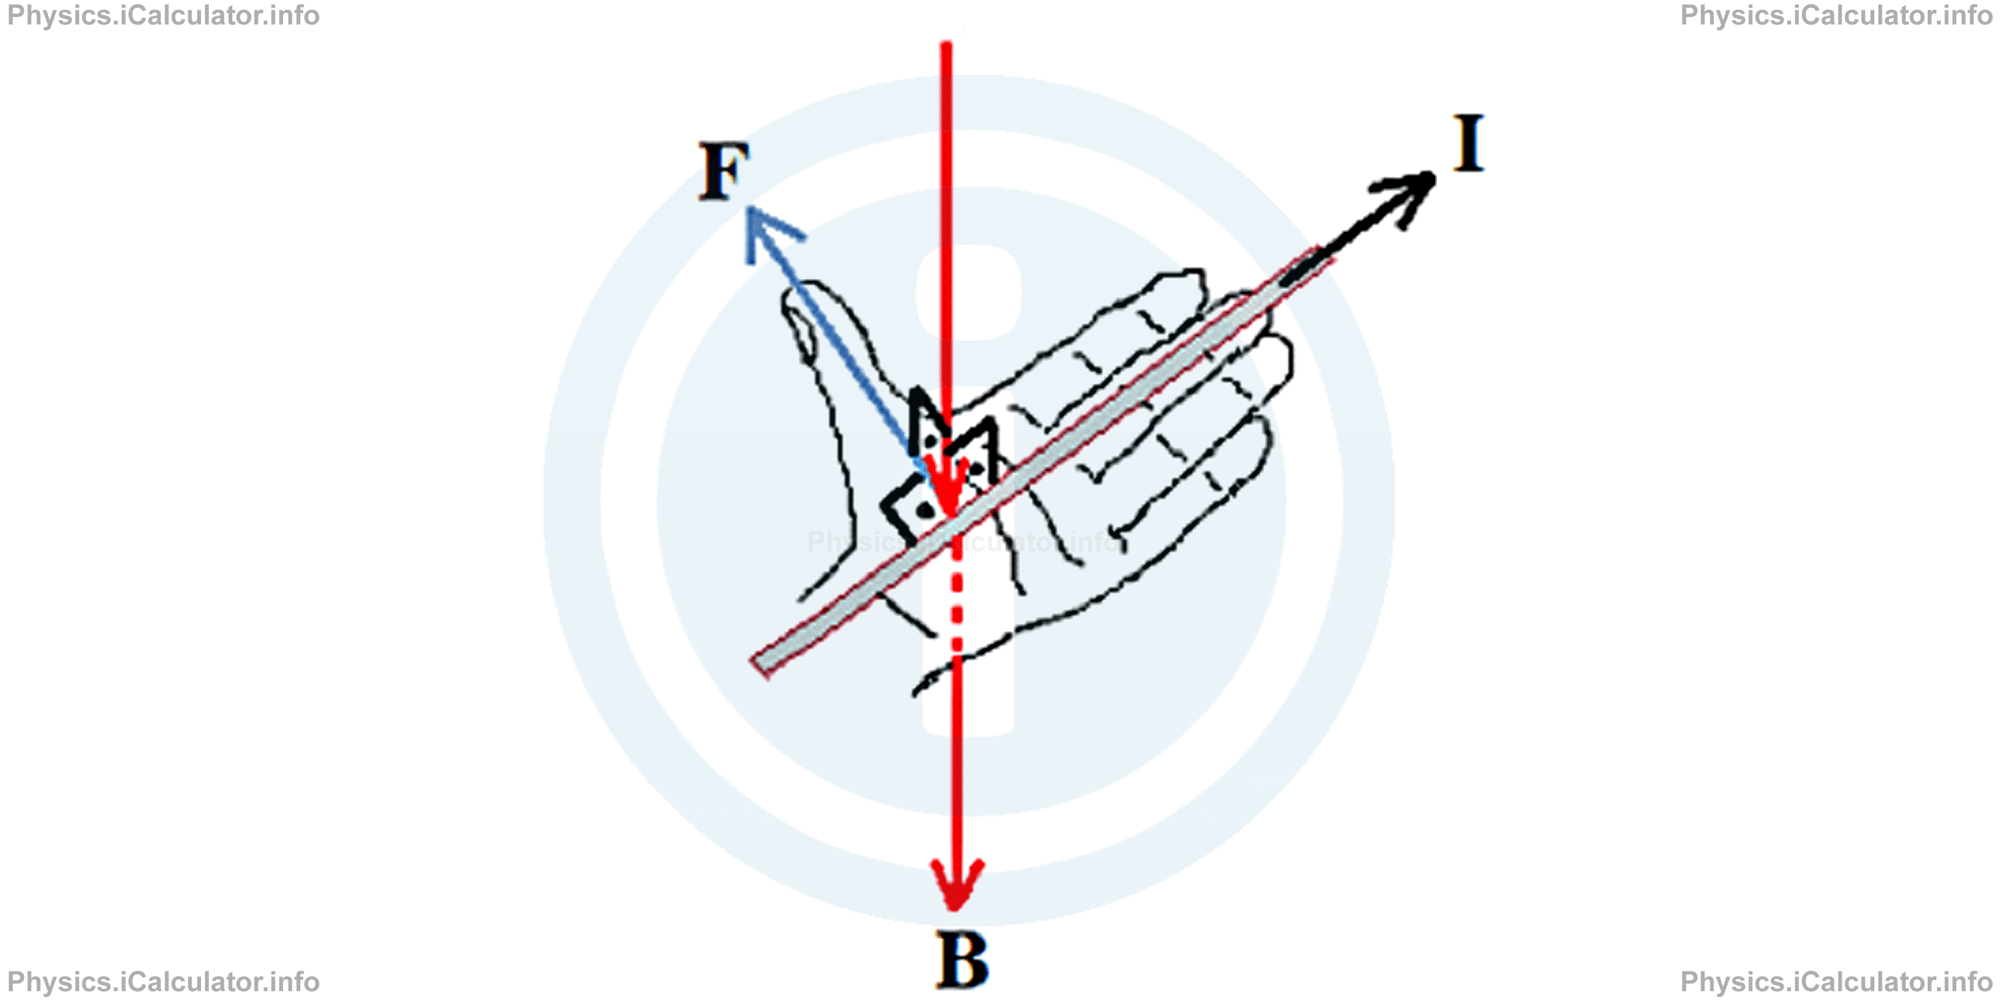 Physics Tutorials: This image provides visual information for the physics tutorial Magnetic Force on a Current Carrying Wire. Ampere's Force 